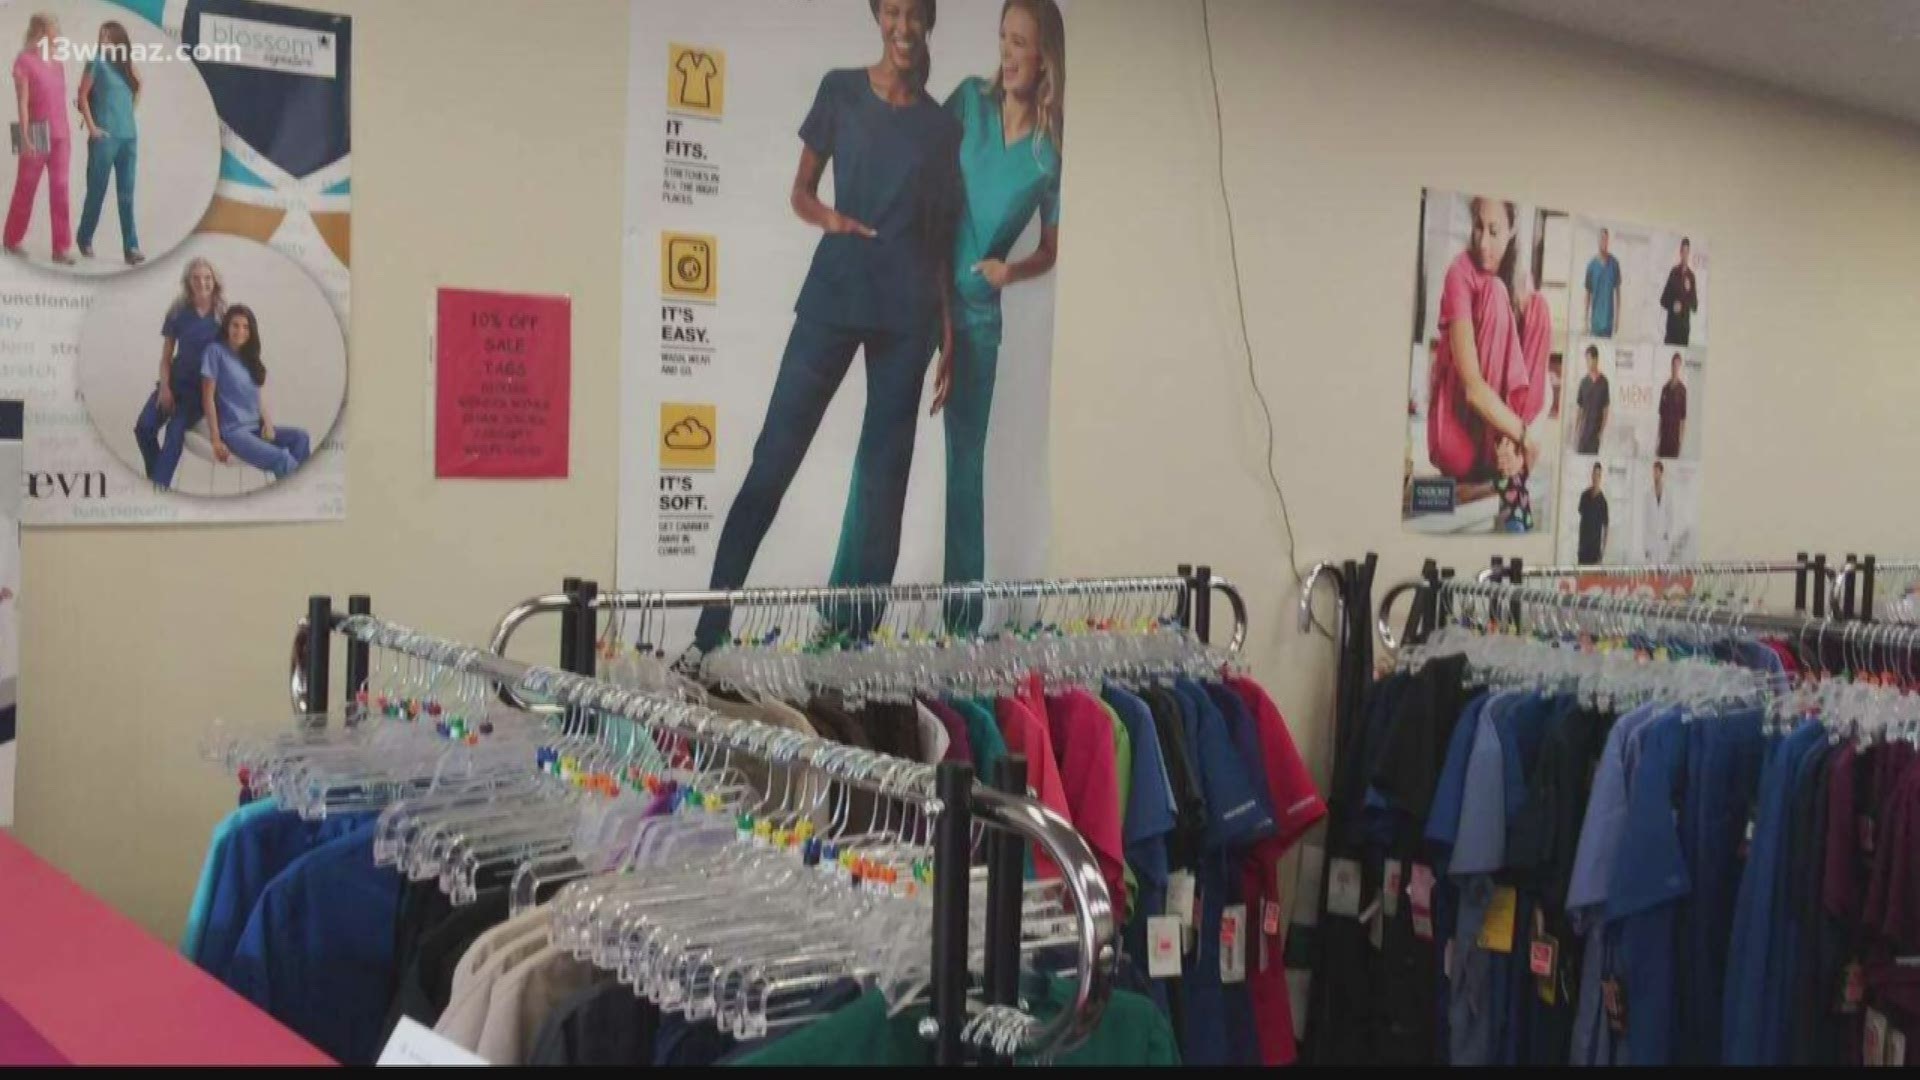 Many stores in the community have seen a significant drop in business due to COVID-19, but the Uniform Store remains open and continues to serve healthcare workers.